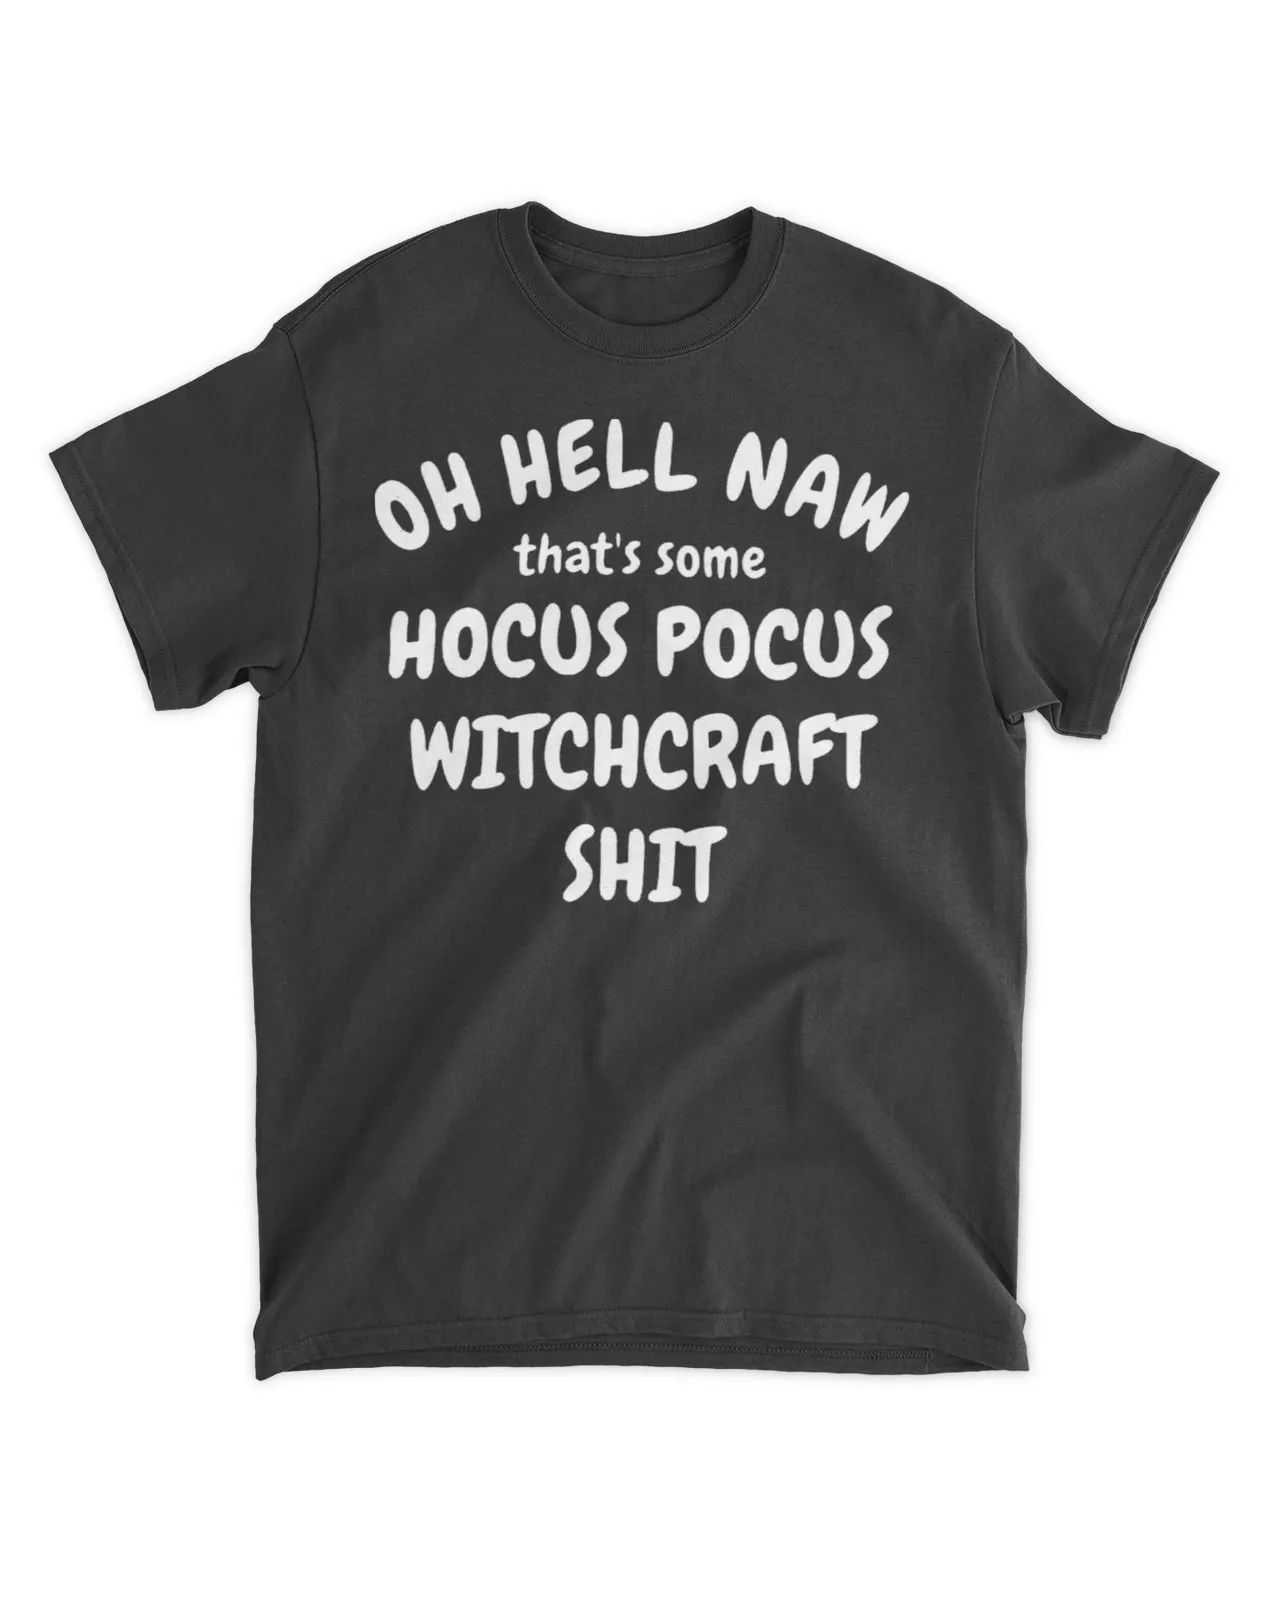  Oh hell naw that's some Hocus Pocus Witchcraft shit shirt